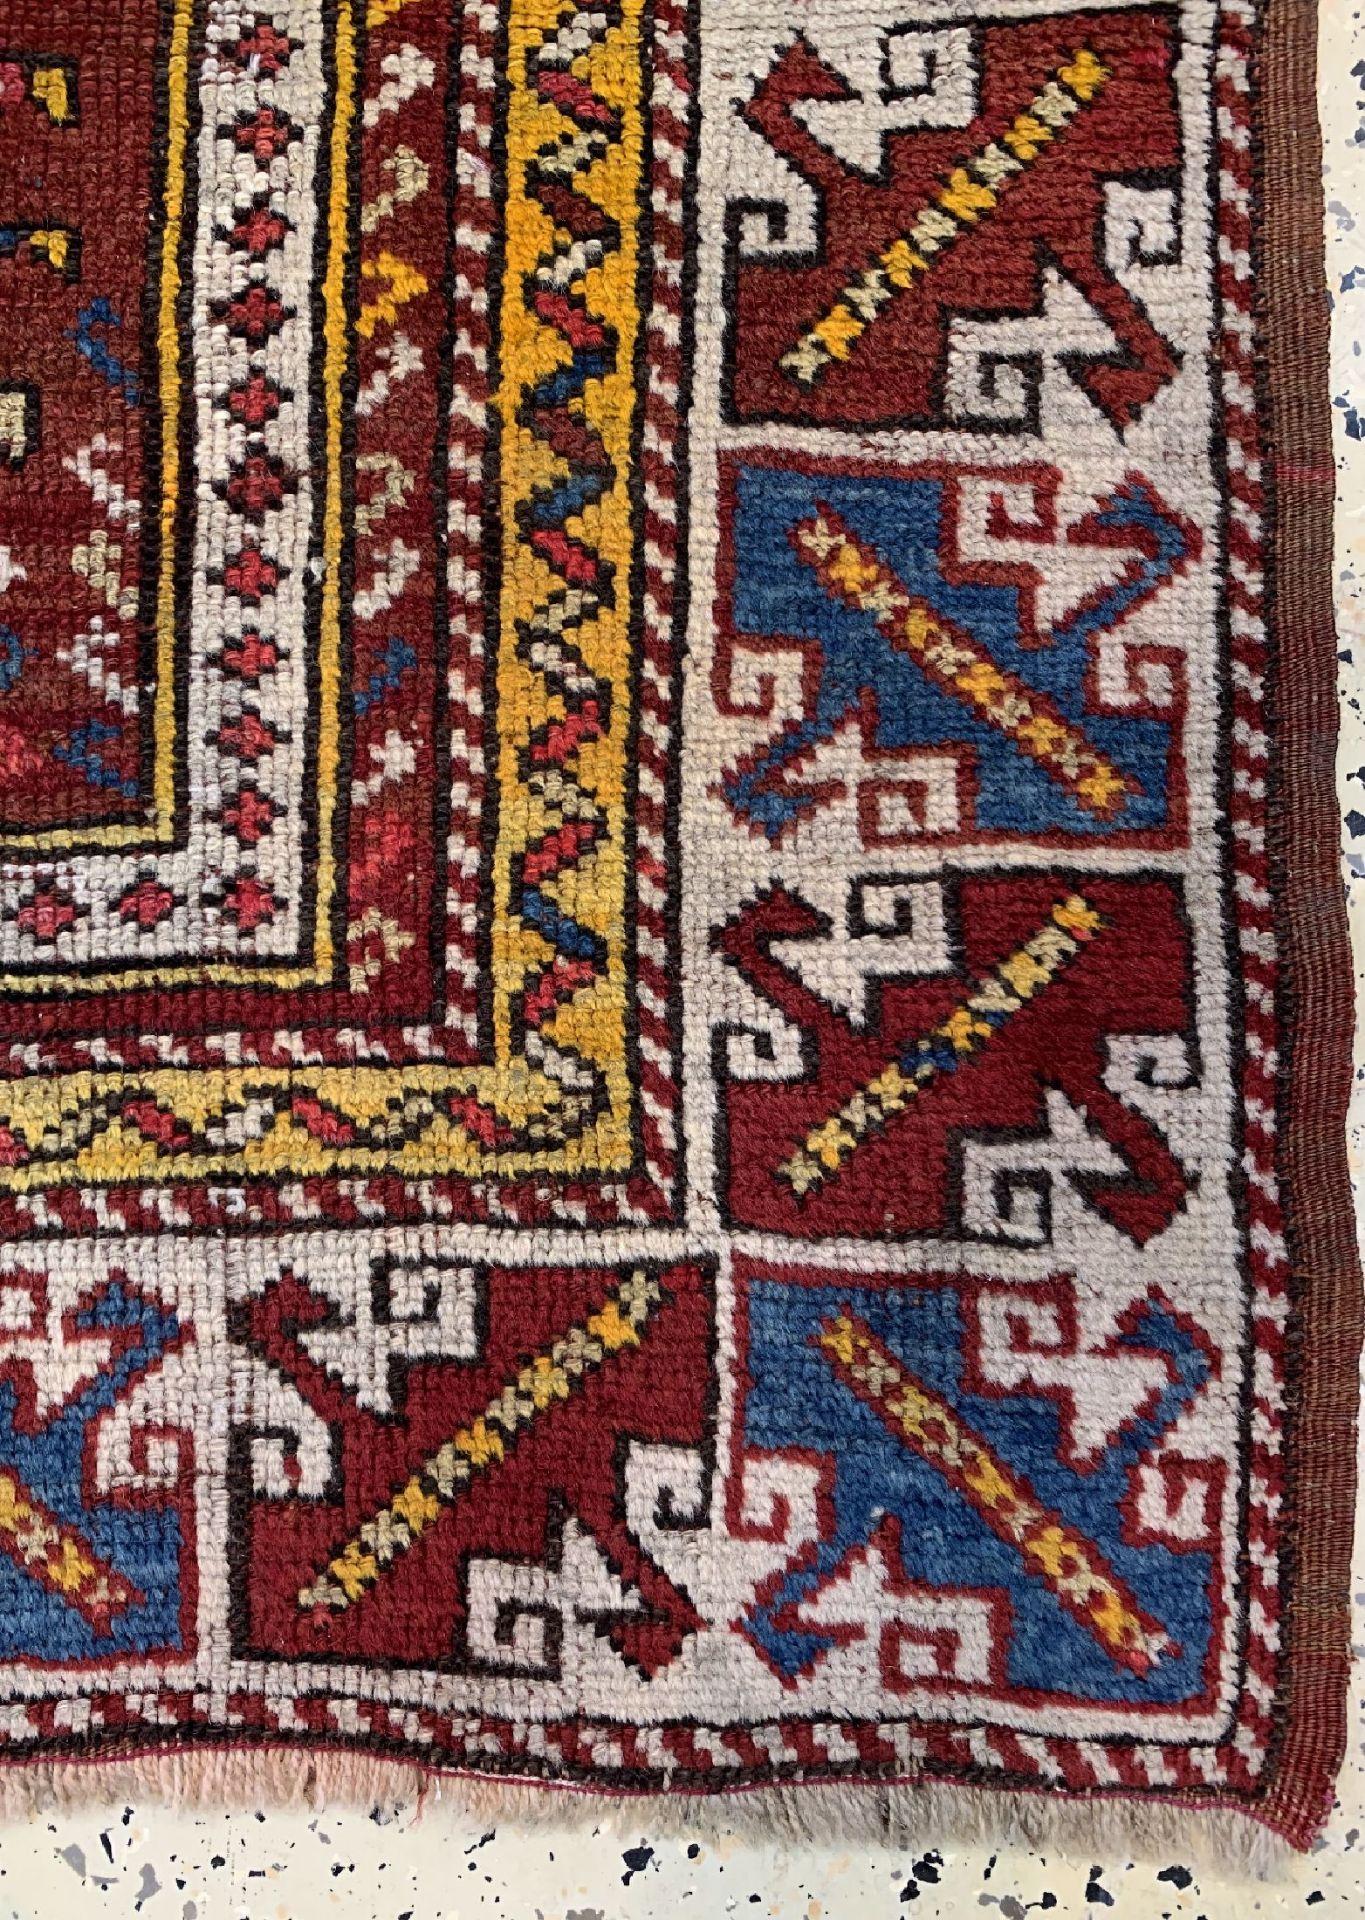 This wonderful niche carpet comes from Avunya, northwest Anatolia in the province of Bergama. It has the typical attributes of these rare carpets. The harmonious balance of the design, the deep red prayer niche and the wide, powerful white-ground